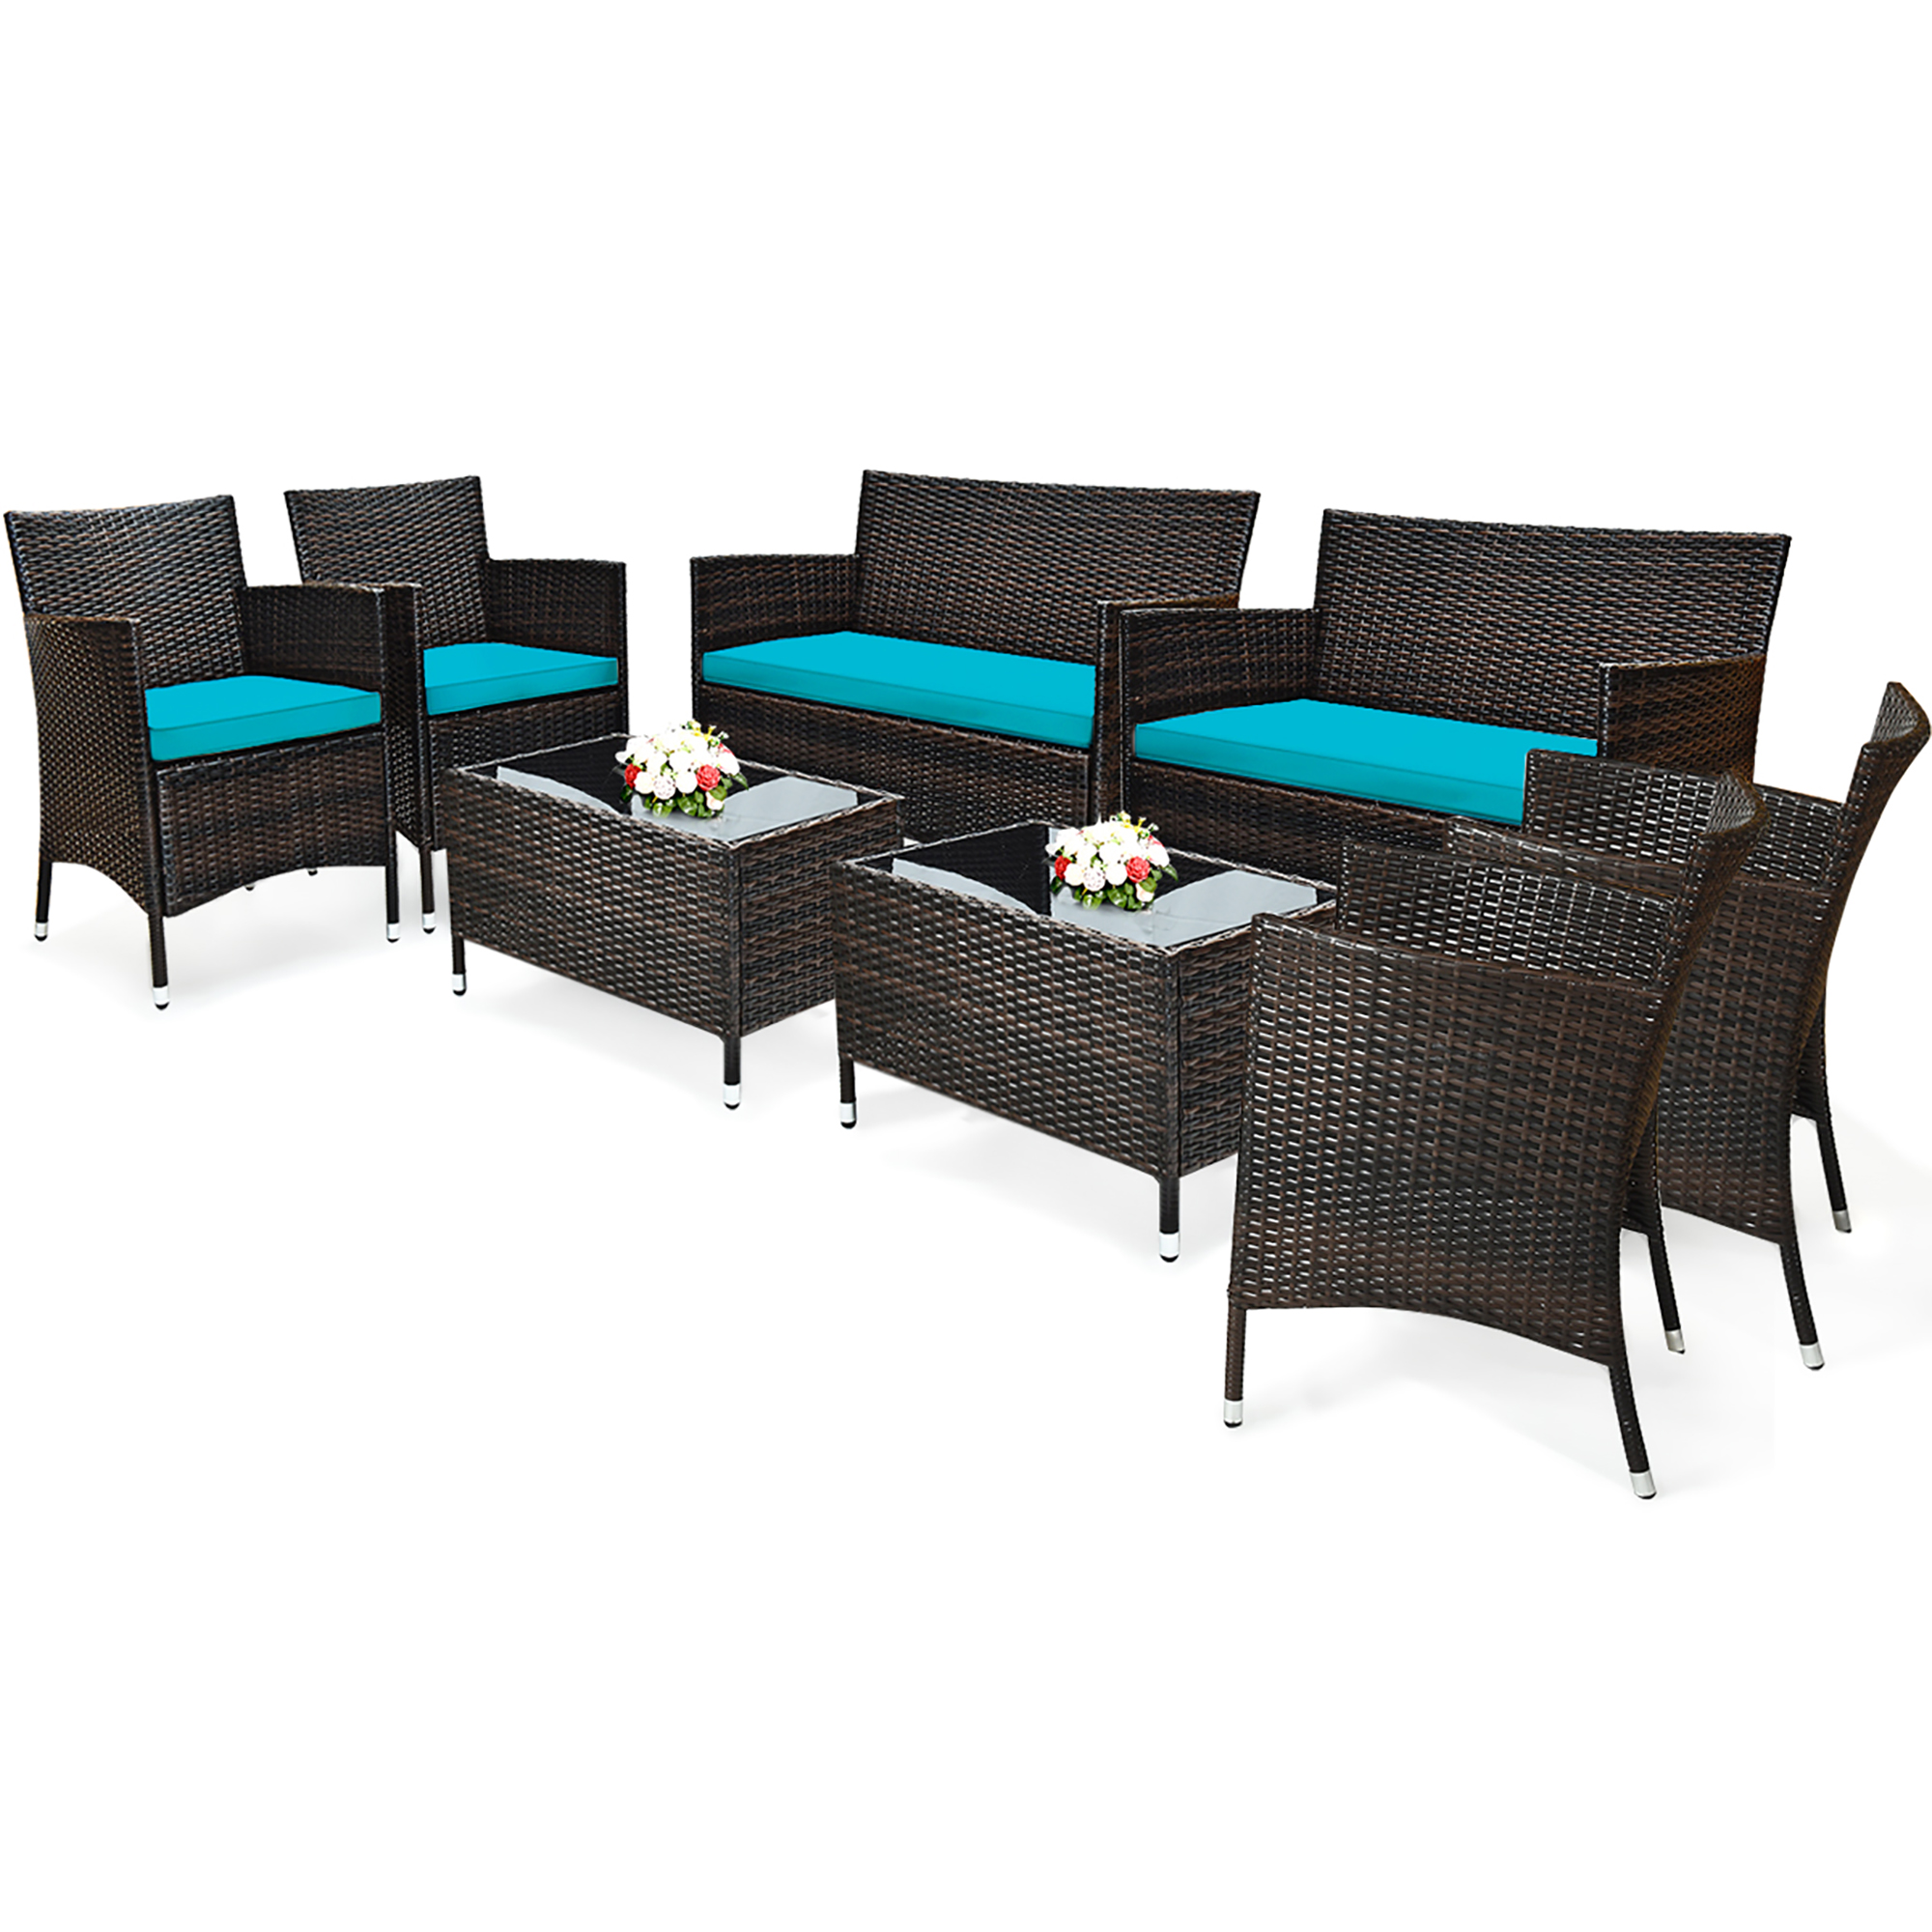 Costway 8PCS Rattan Patio Cushioned Sofa Chair Coffee Table Turquoise - image 2 of 9